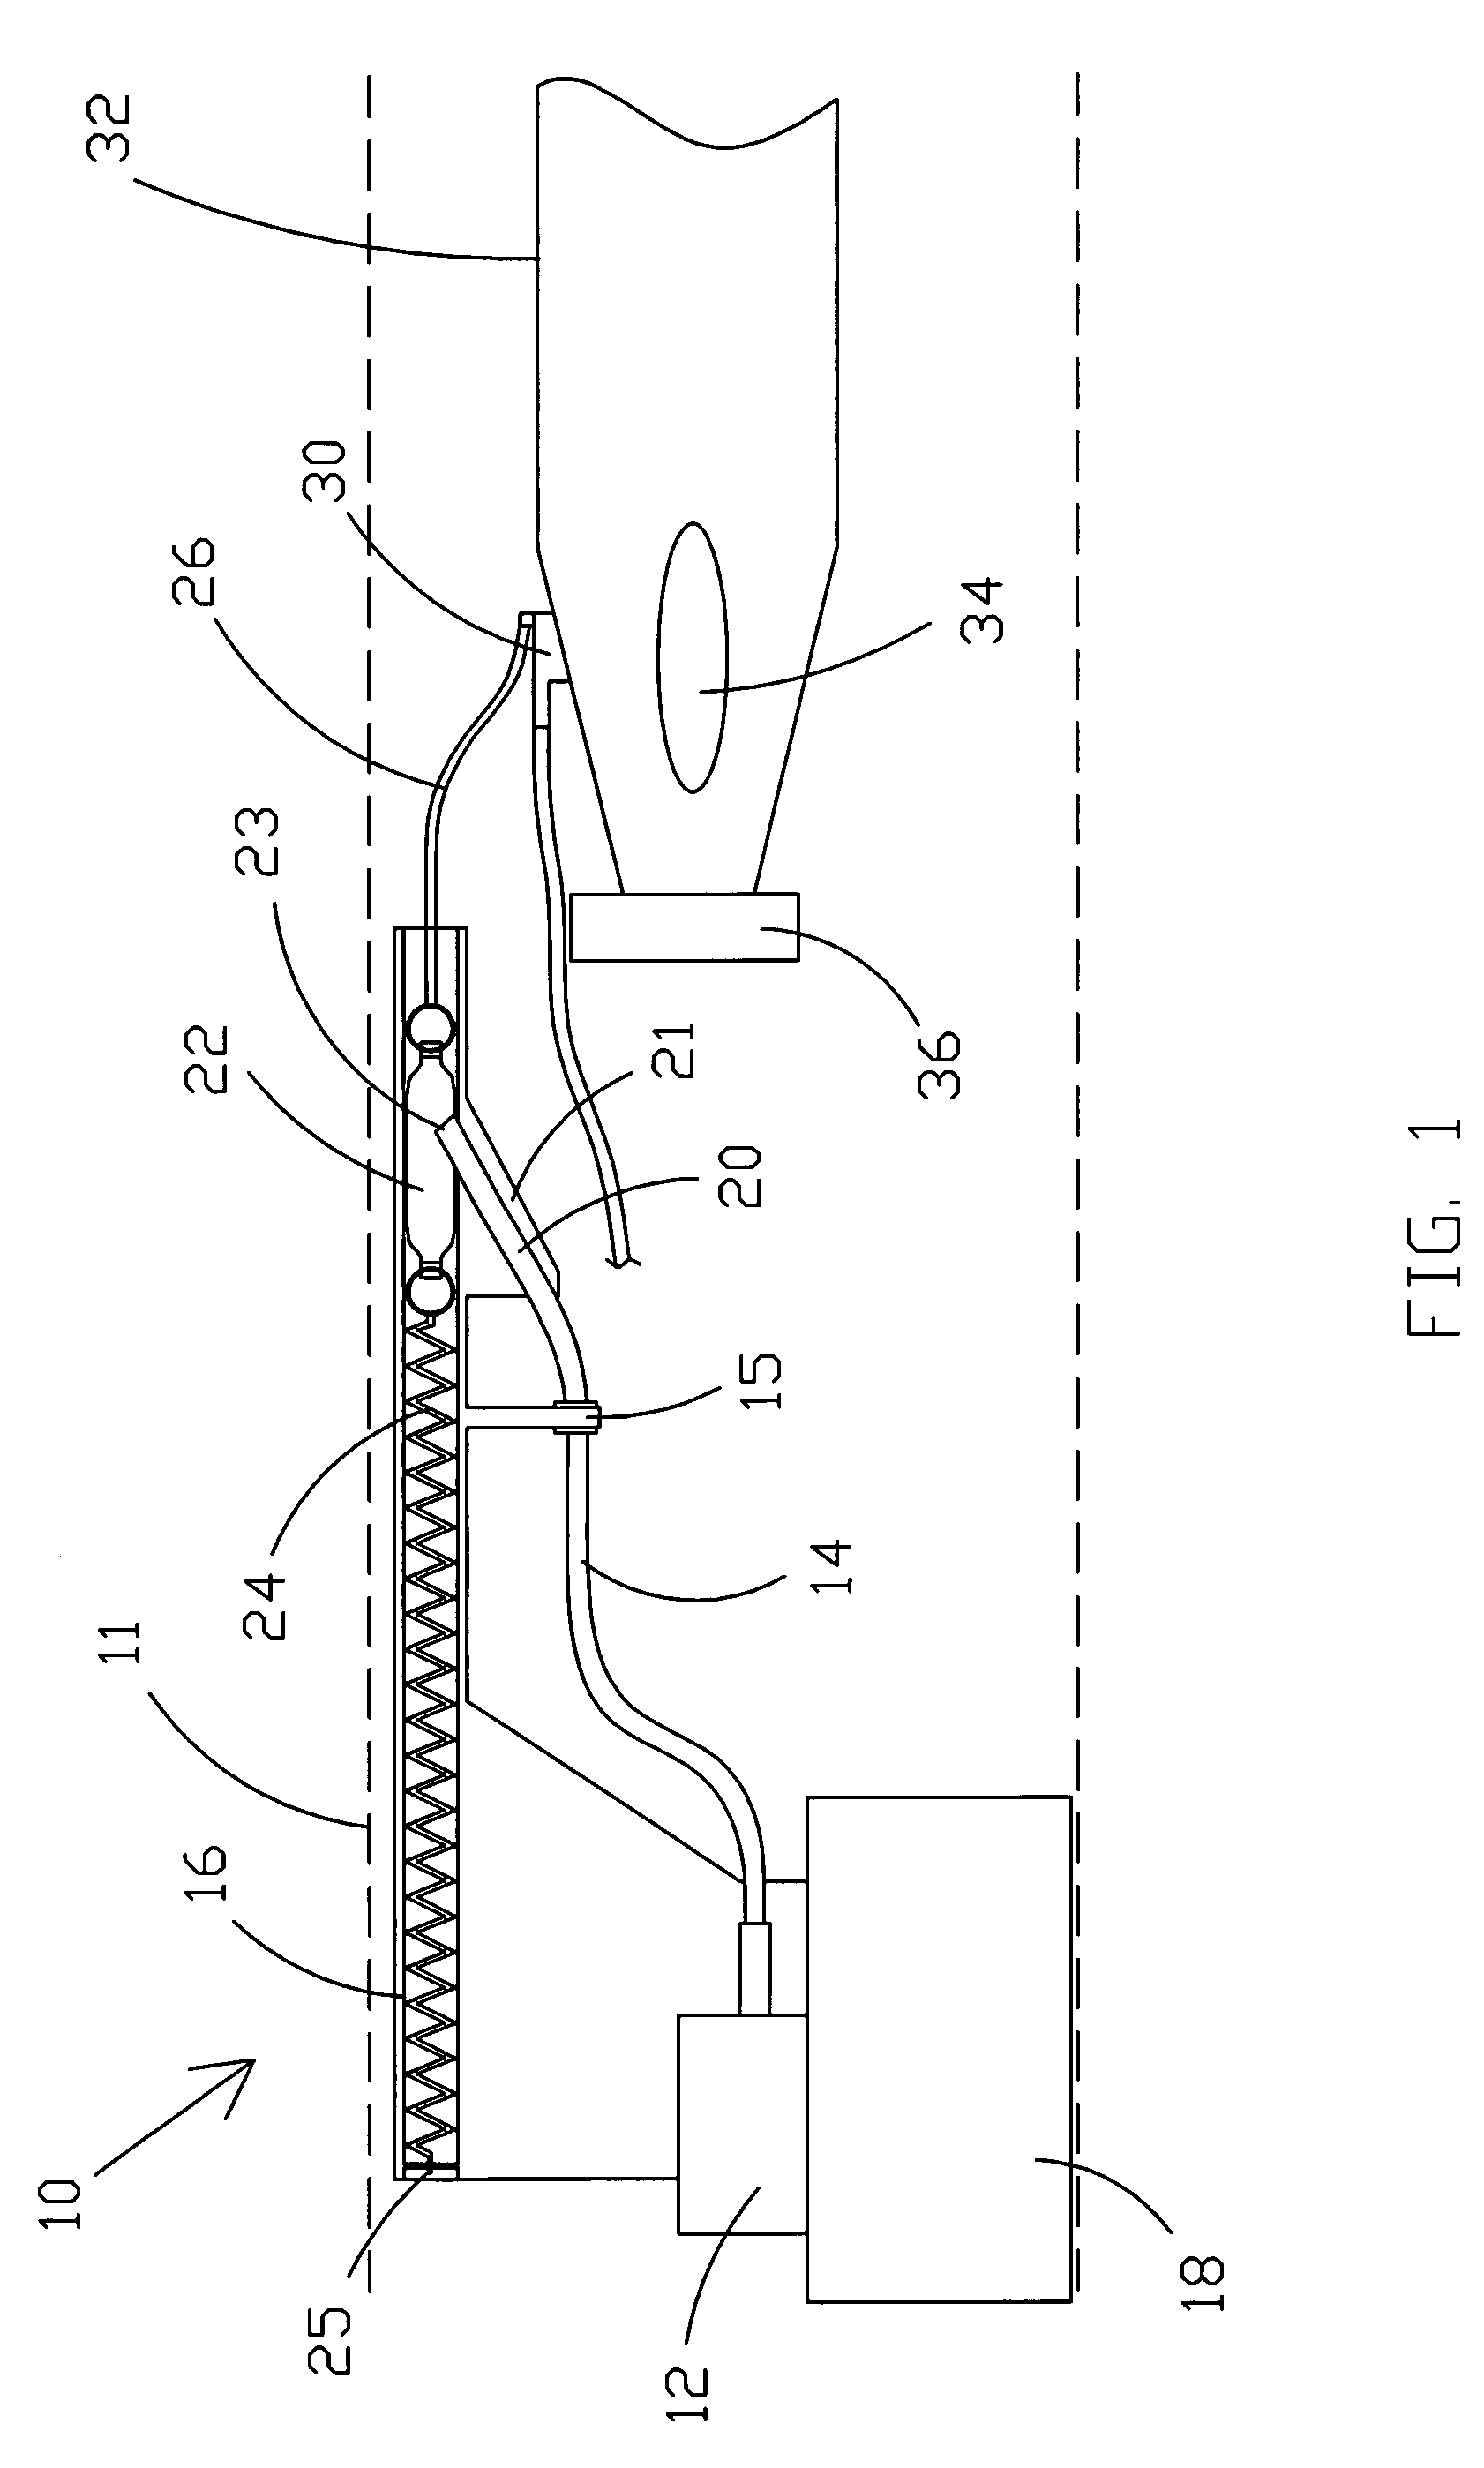 Umbilical retraction assembly and method